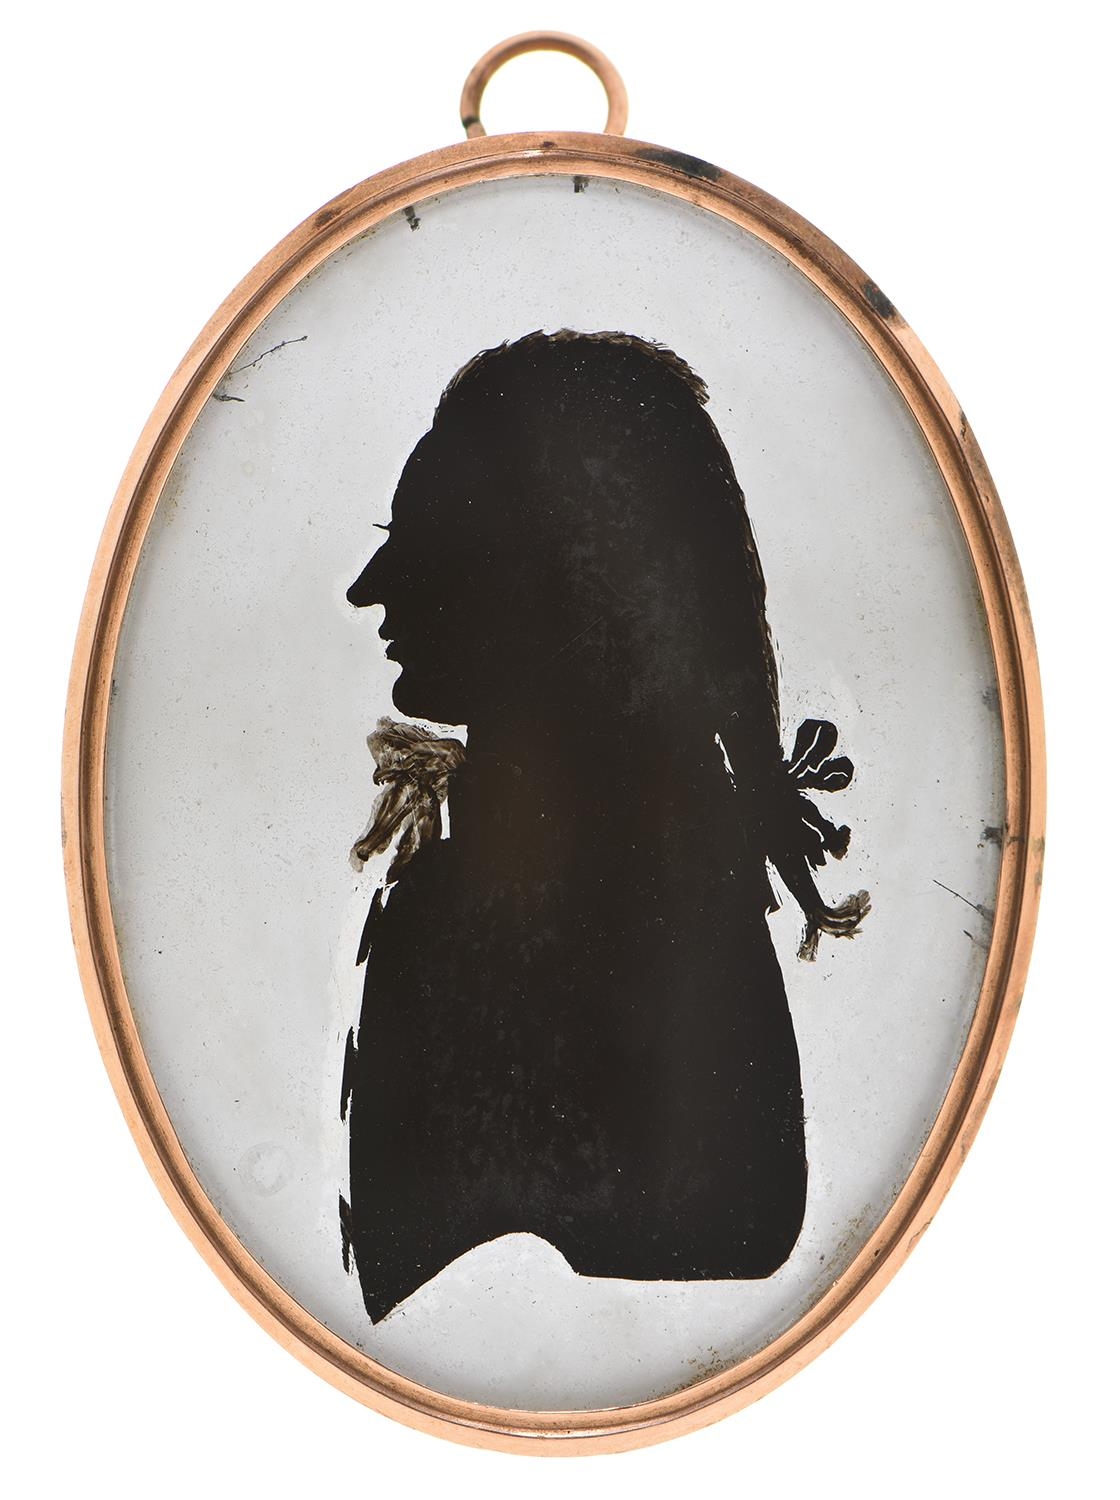 Charles Christian Rosenberg (c1765-1830) - Silhouette of a Gentleman, in pigtail wig and cravat,